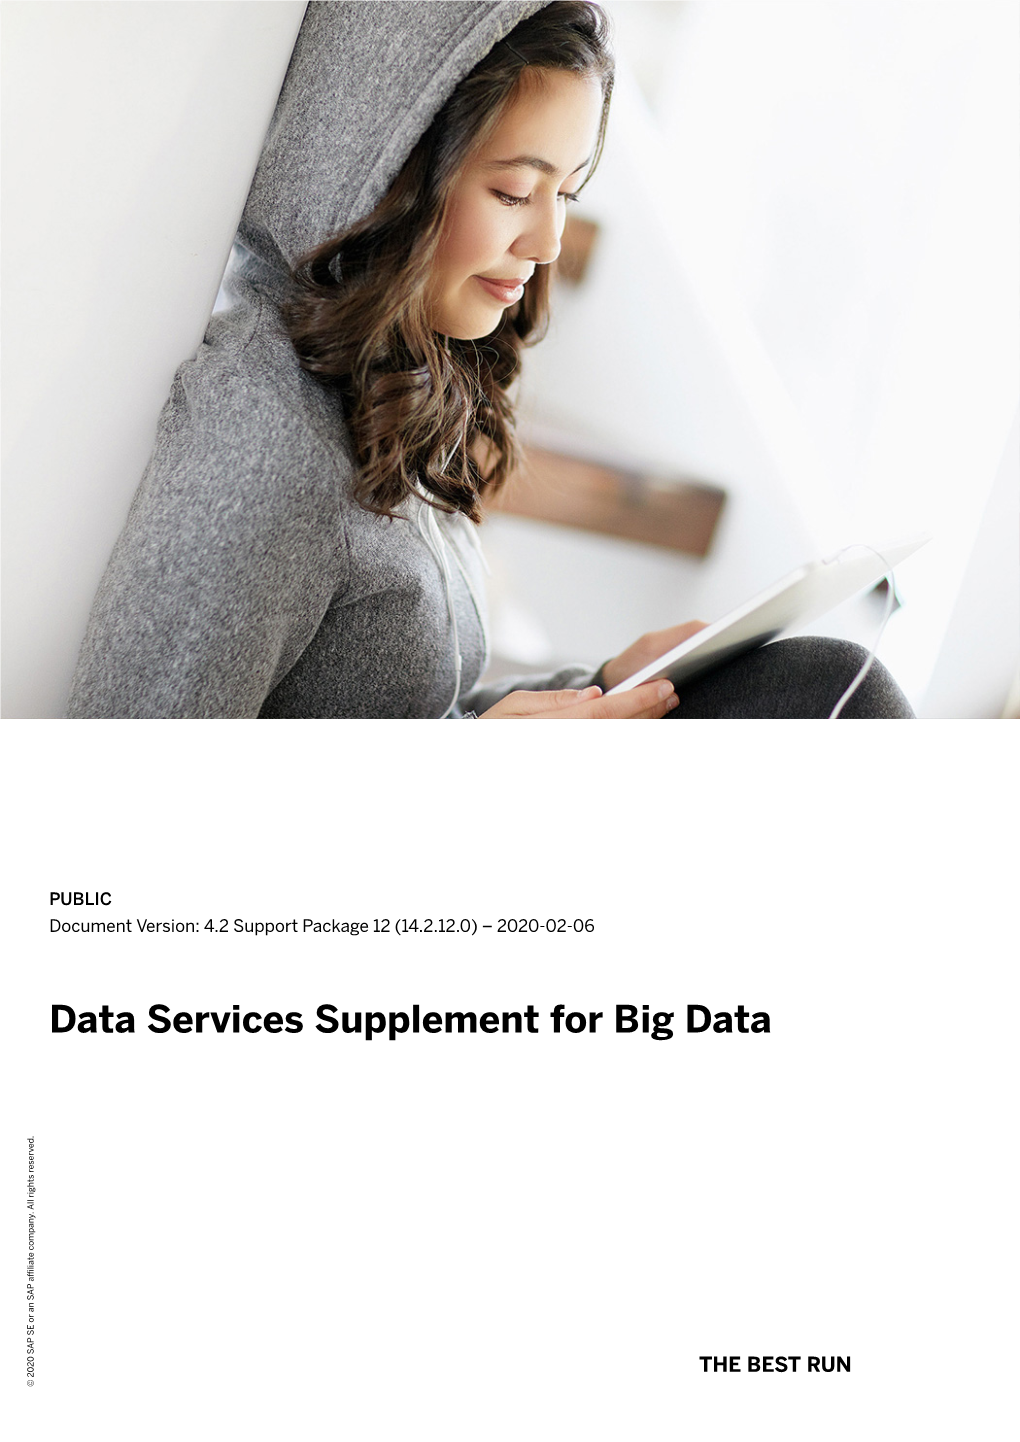 Data Services Supplement for Big Data Company